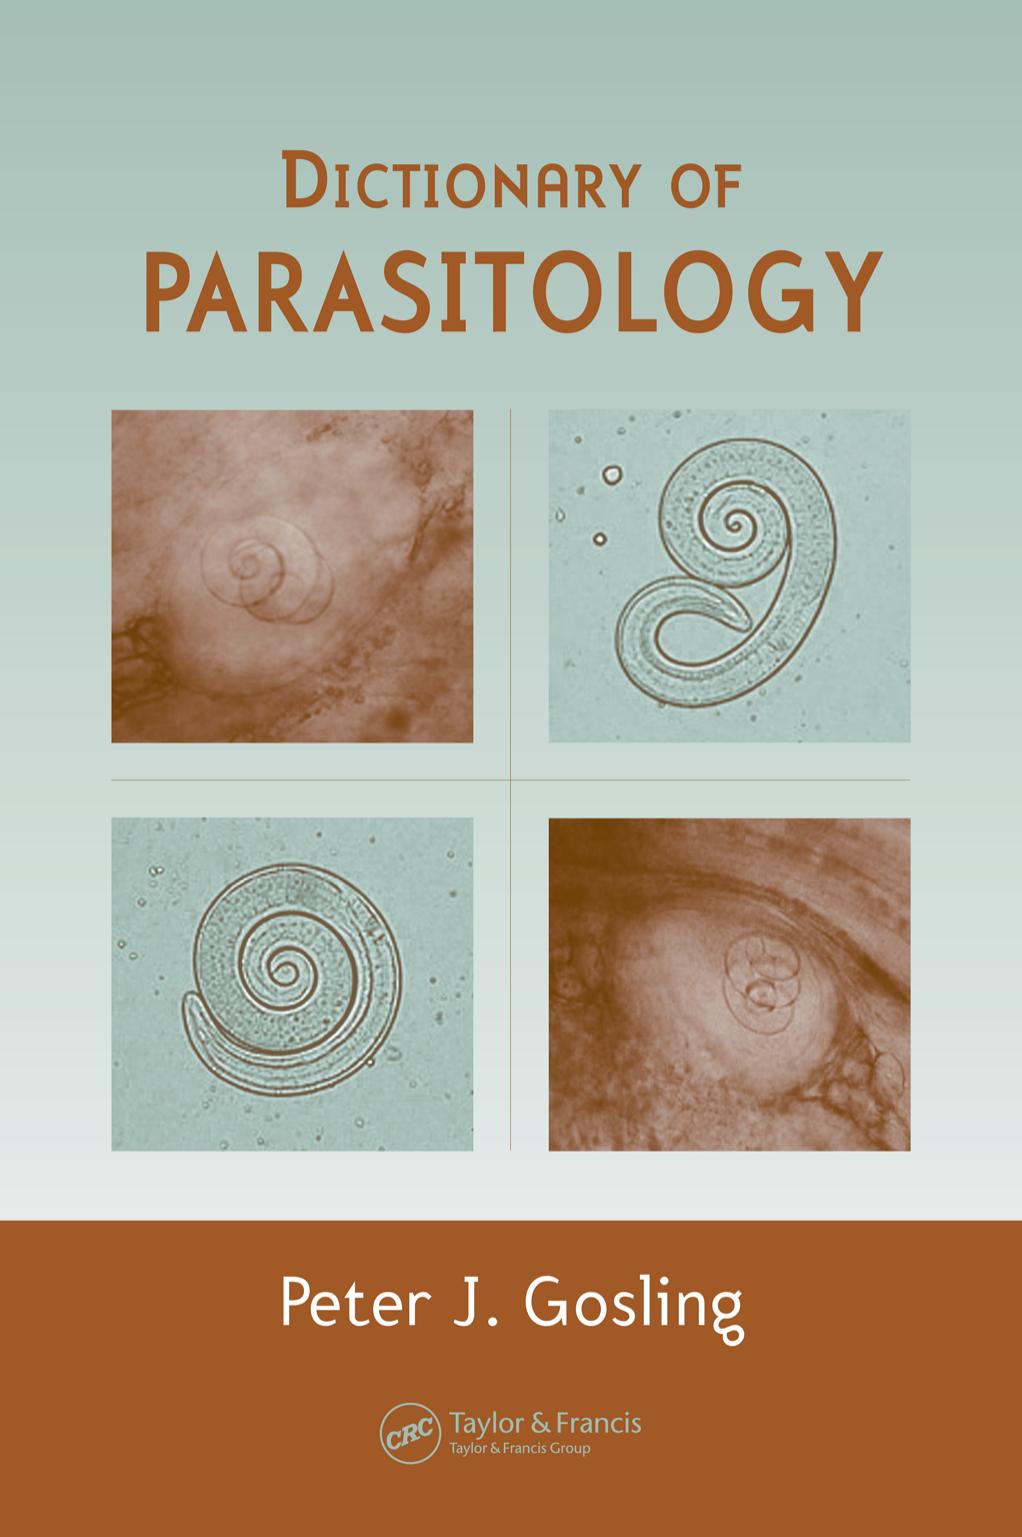 Microsoft Word - _INTRO_ Dictionary of Parasitology.doc